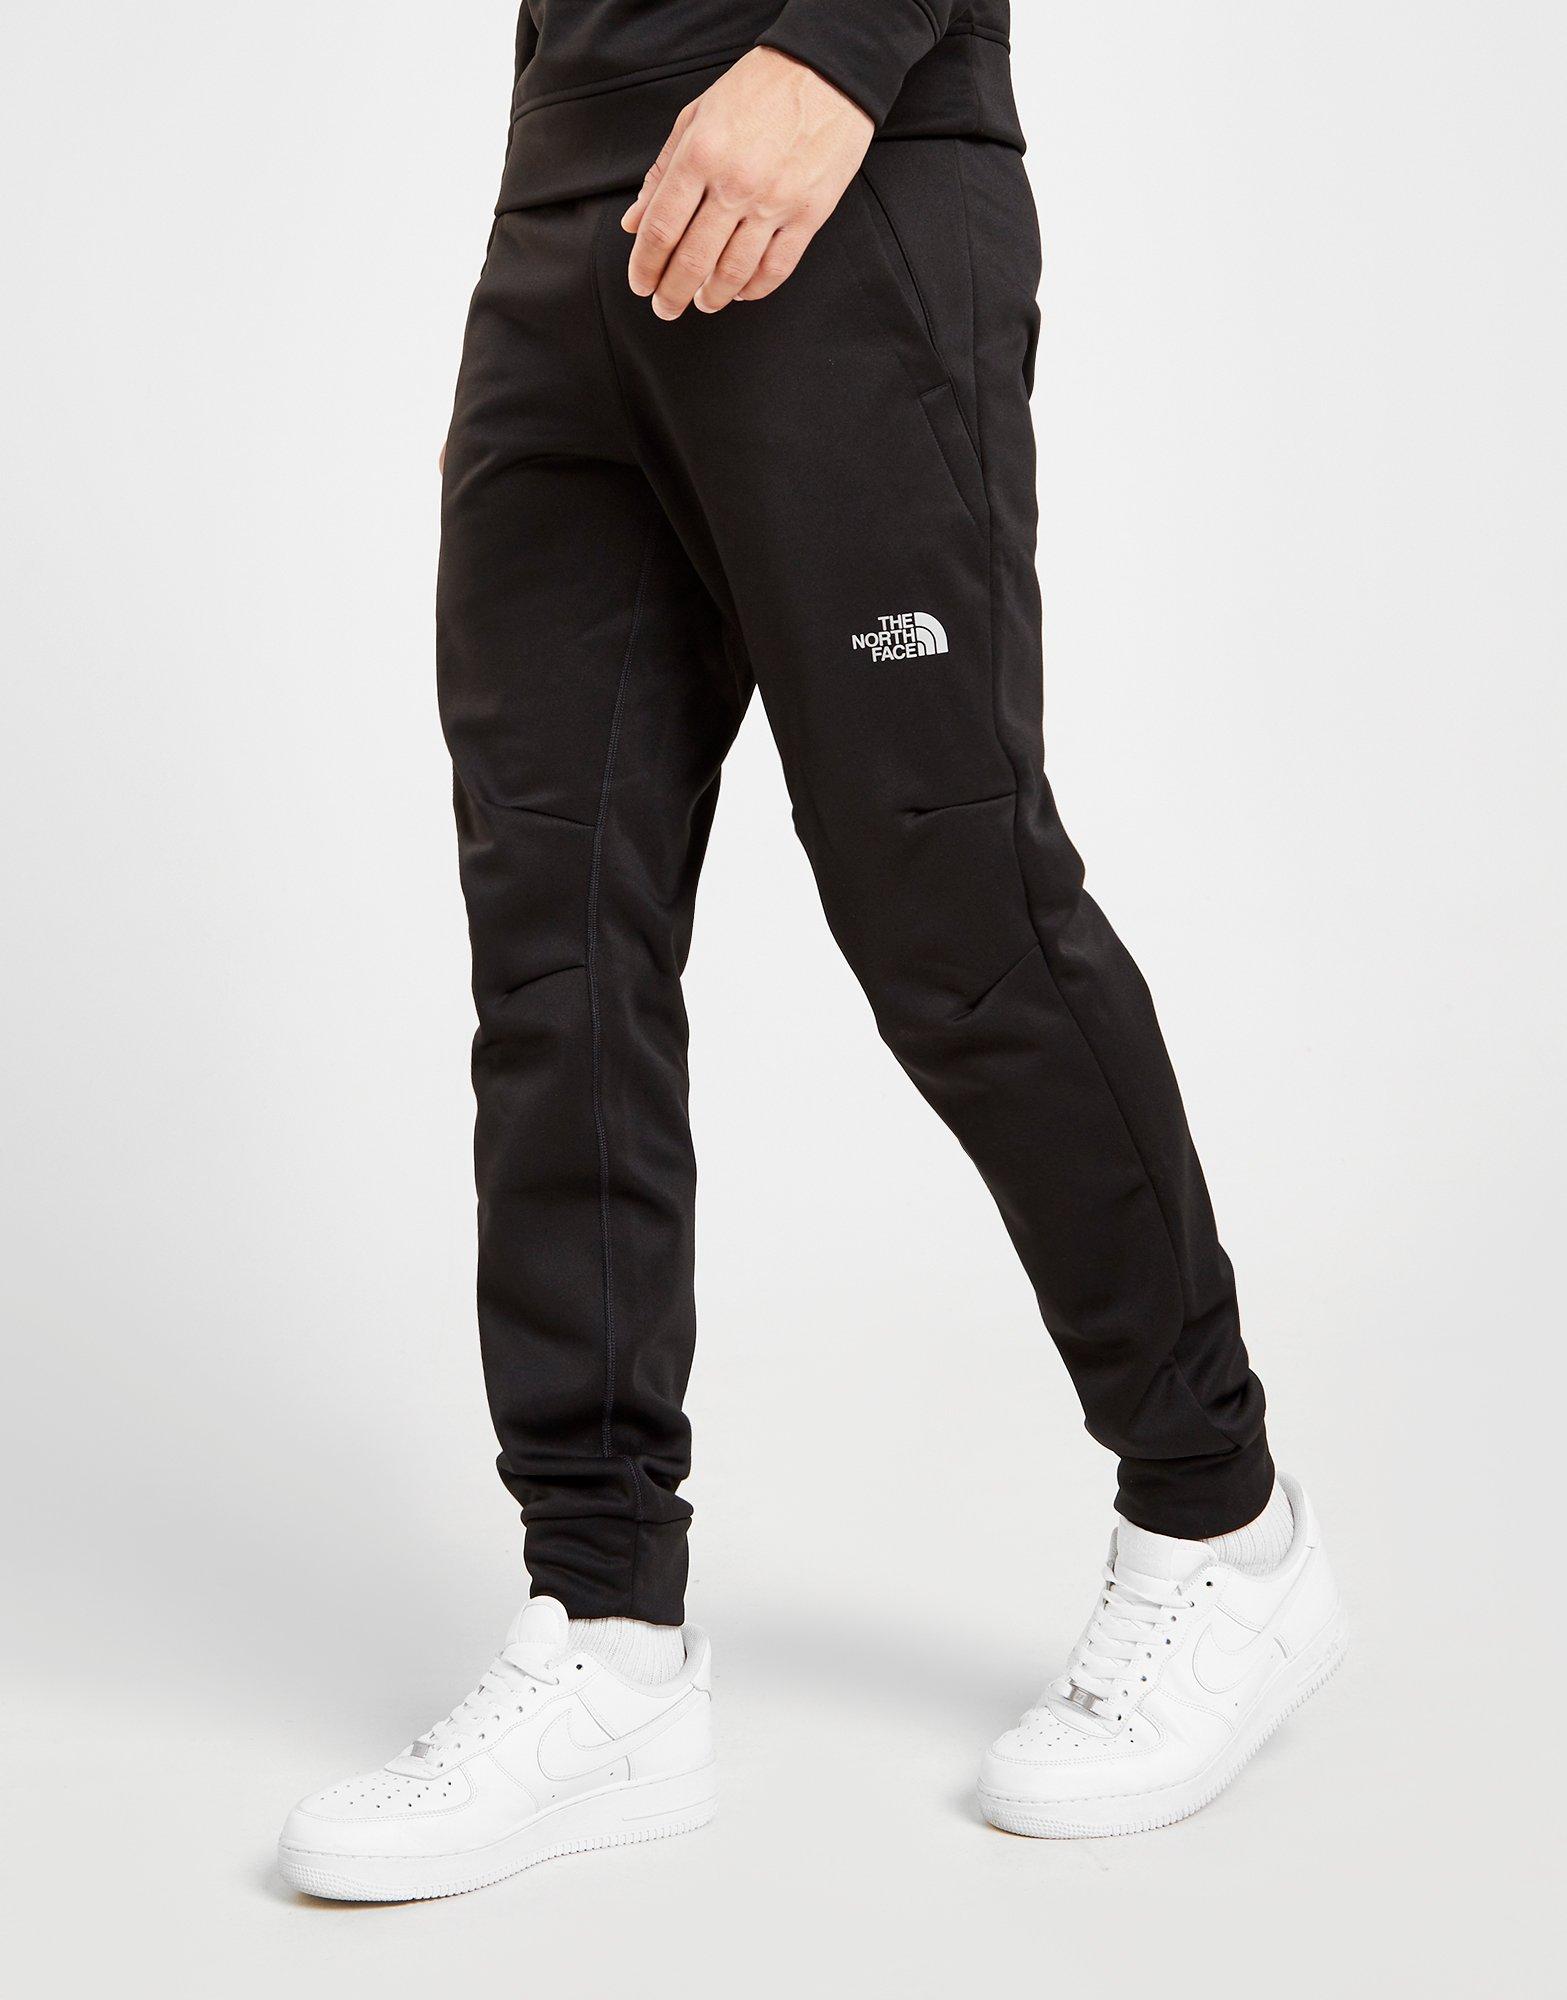 north face track pant